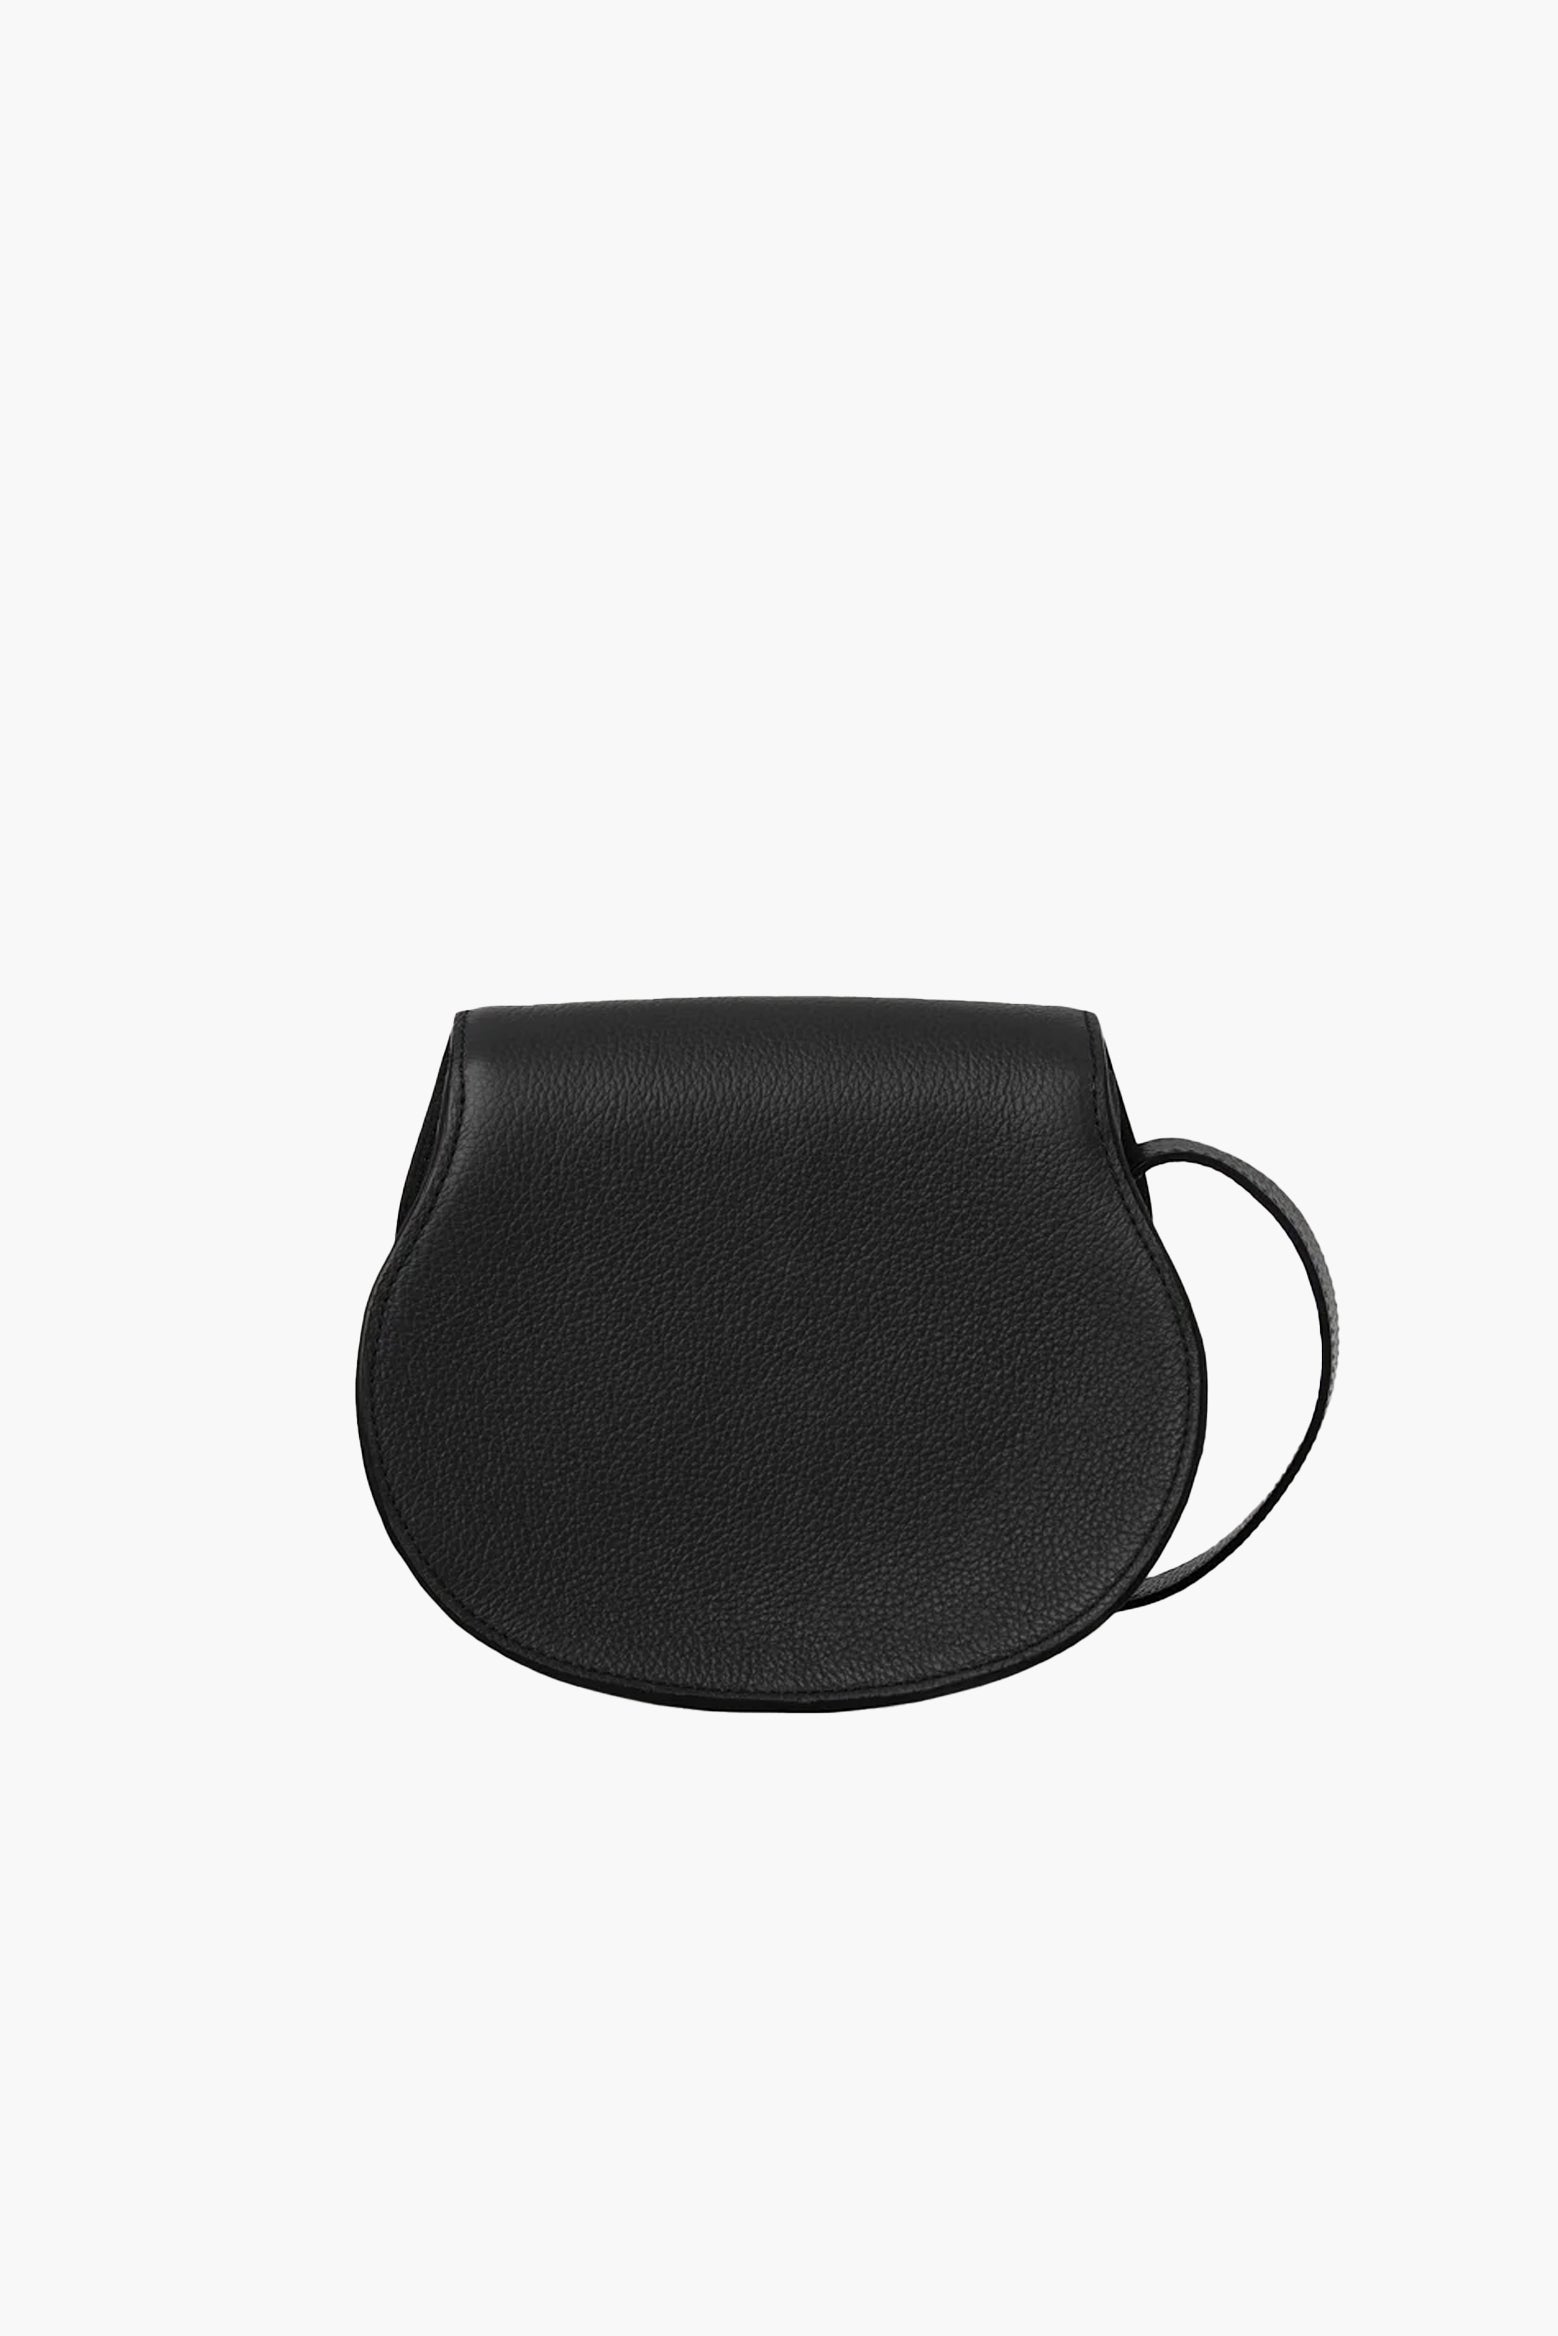 Chloe Marcie Small Saddle Crossbody Bag in Black available at The New Trend Australia.